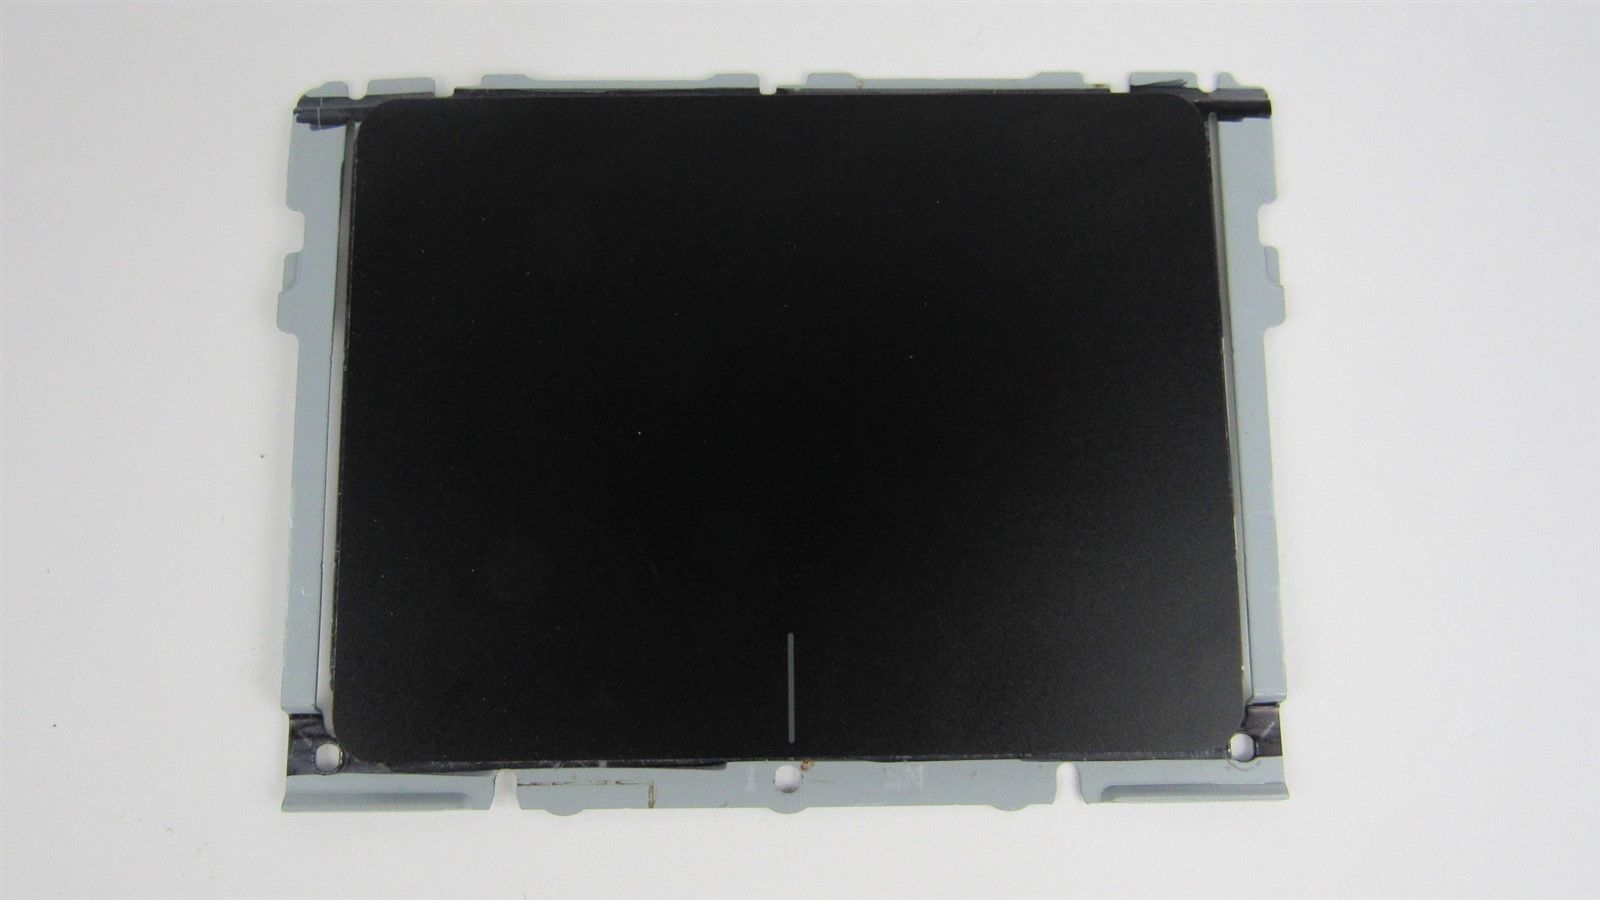 Dell Inspiron 15 5547 5548 Touch Pad Mouse Pad w/ Bracket TM2934 R0Y80 G1206